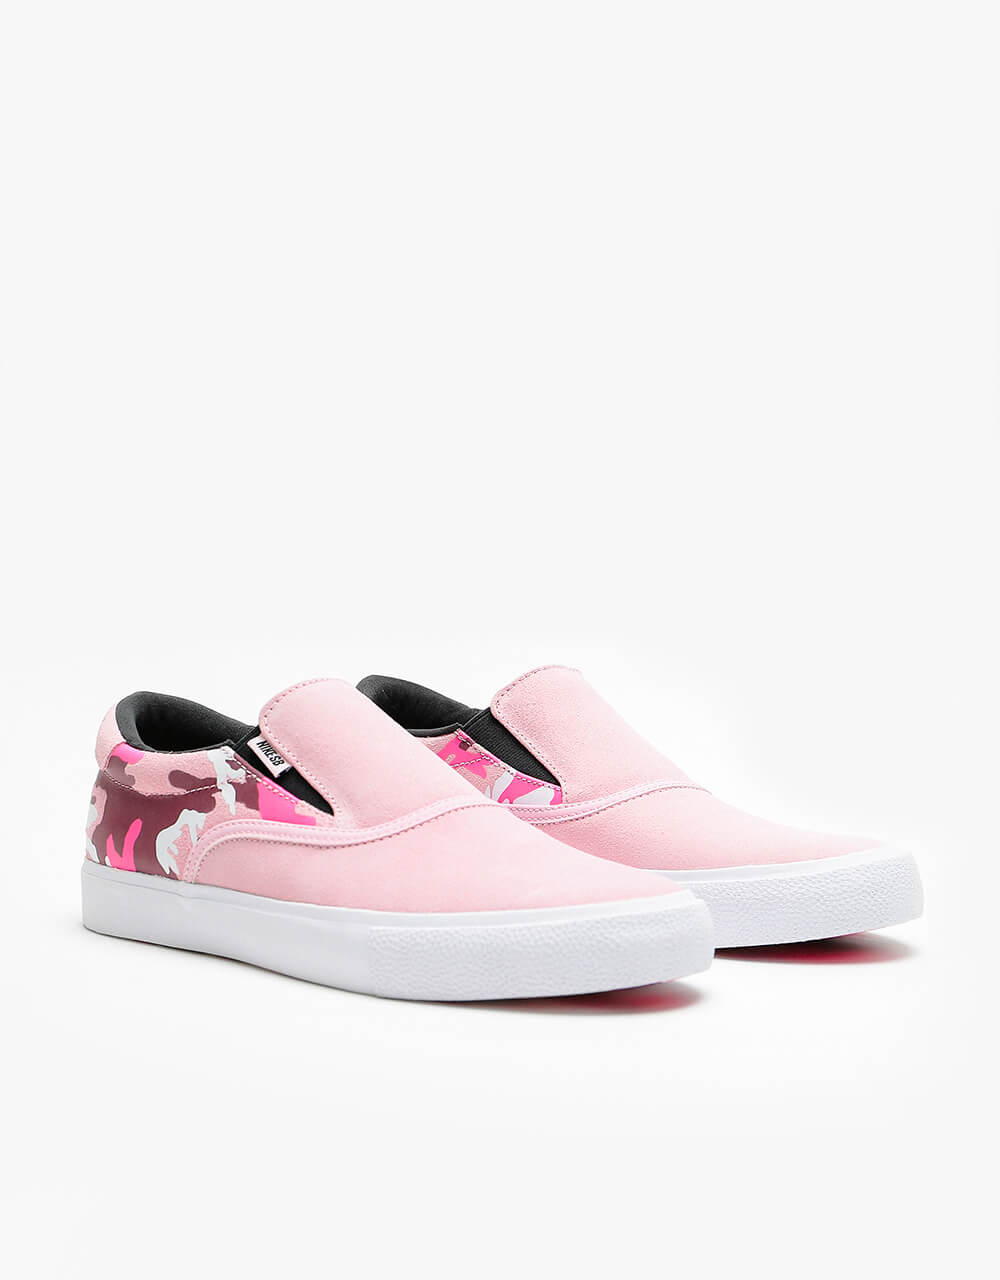 Nike SB Zoom Verona Slip LB Skate Shoes - Prism Pink/Team Red-Pinksicl –  Route One